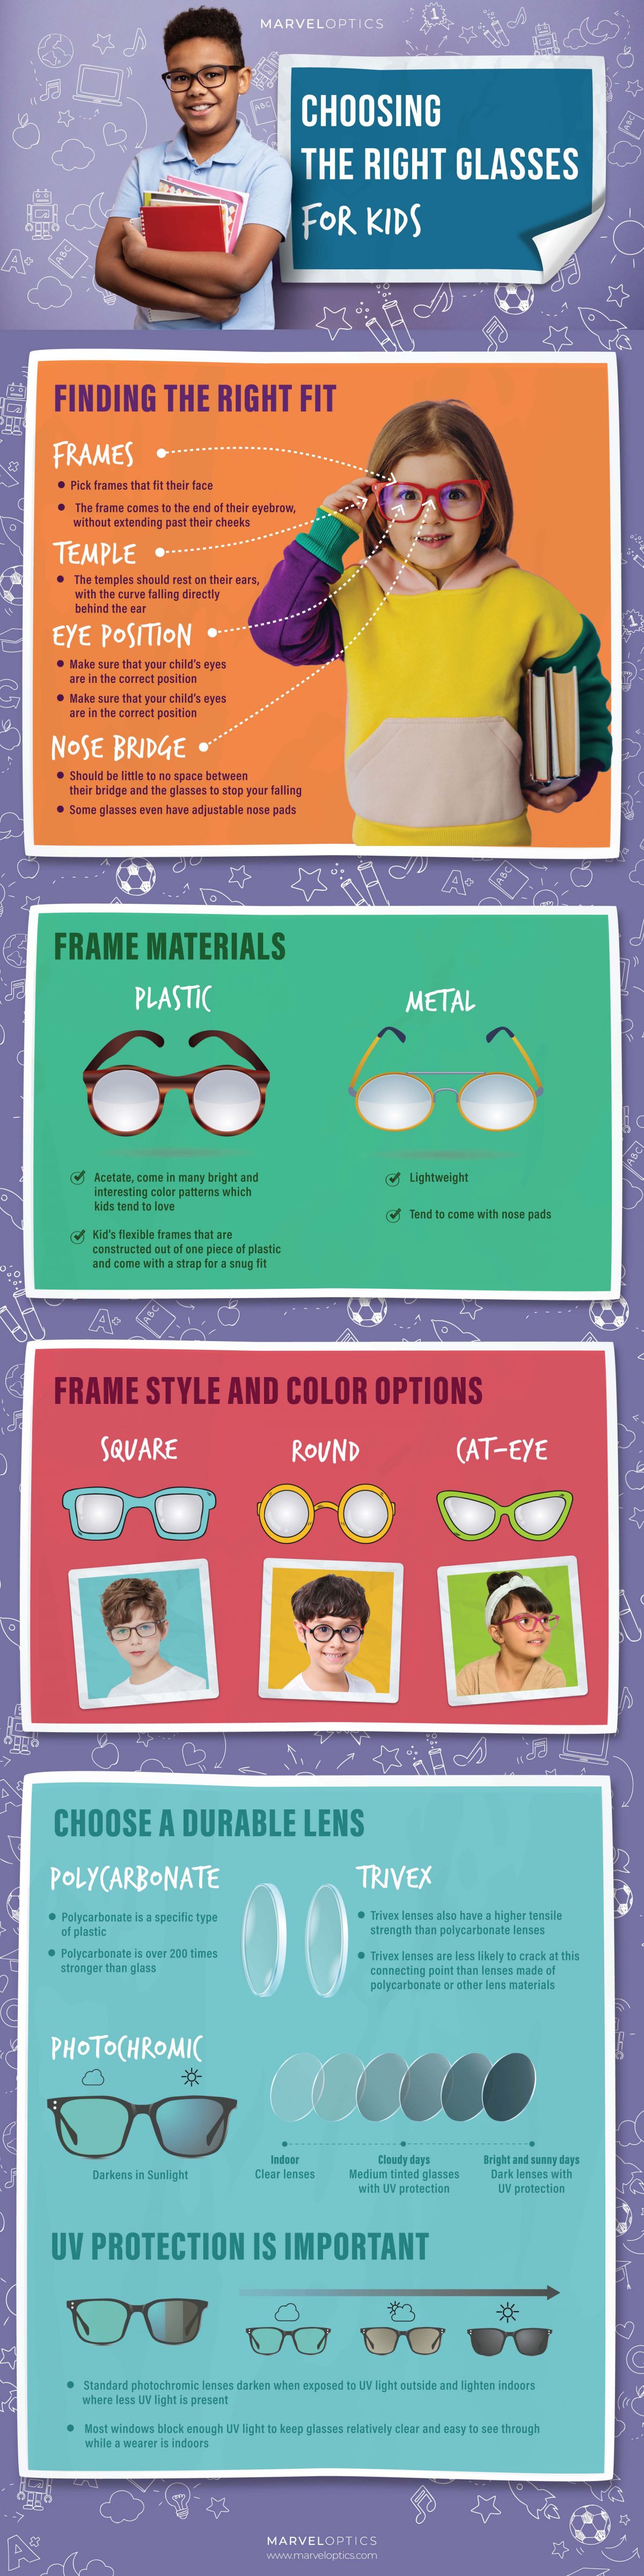 A Complete Guide To Selecting the Right Glasses for Kids Infographic